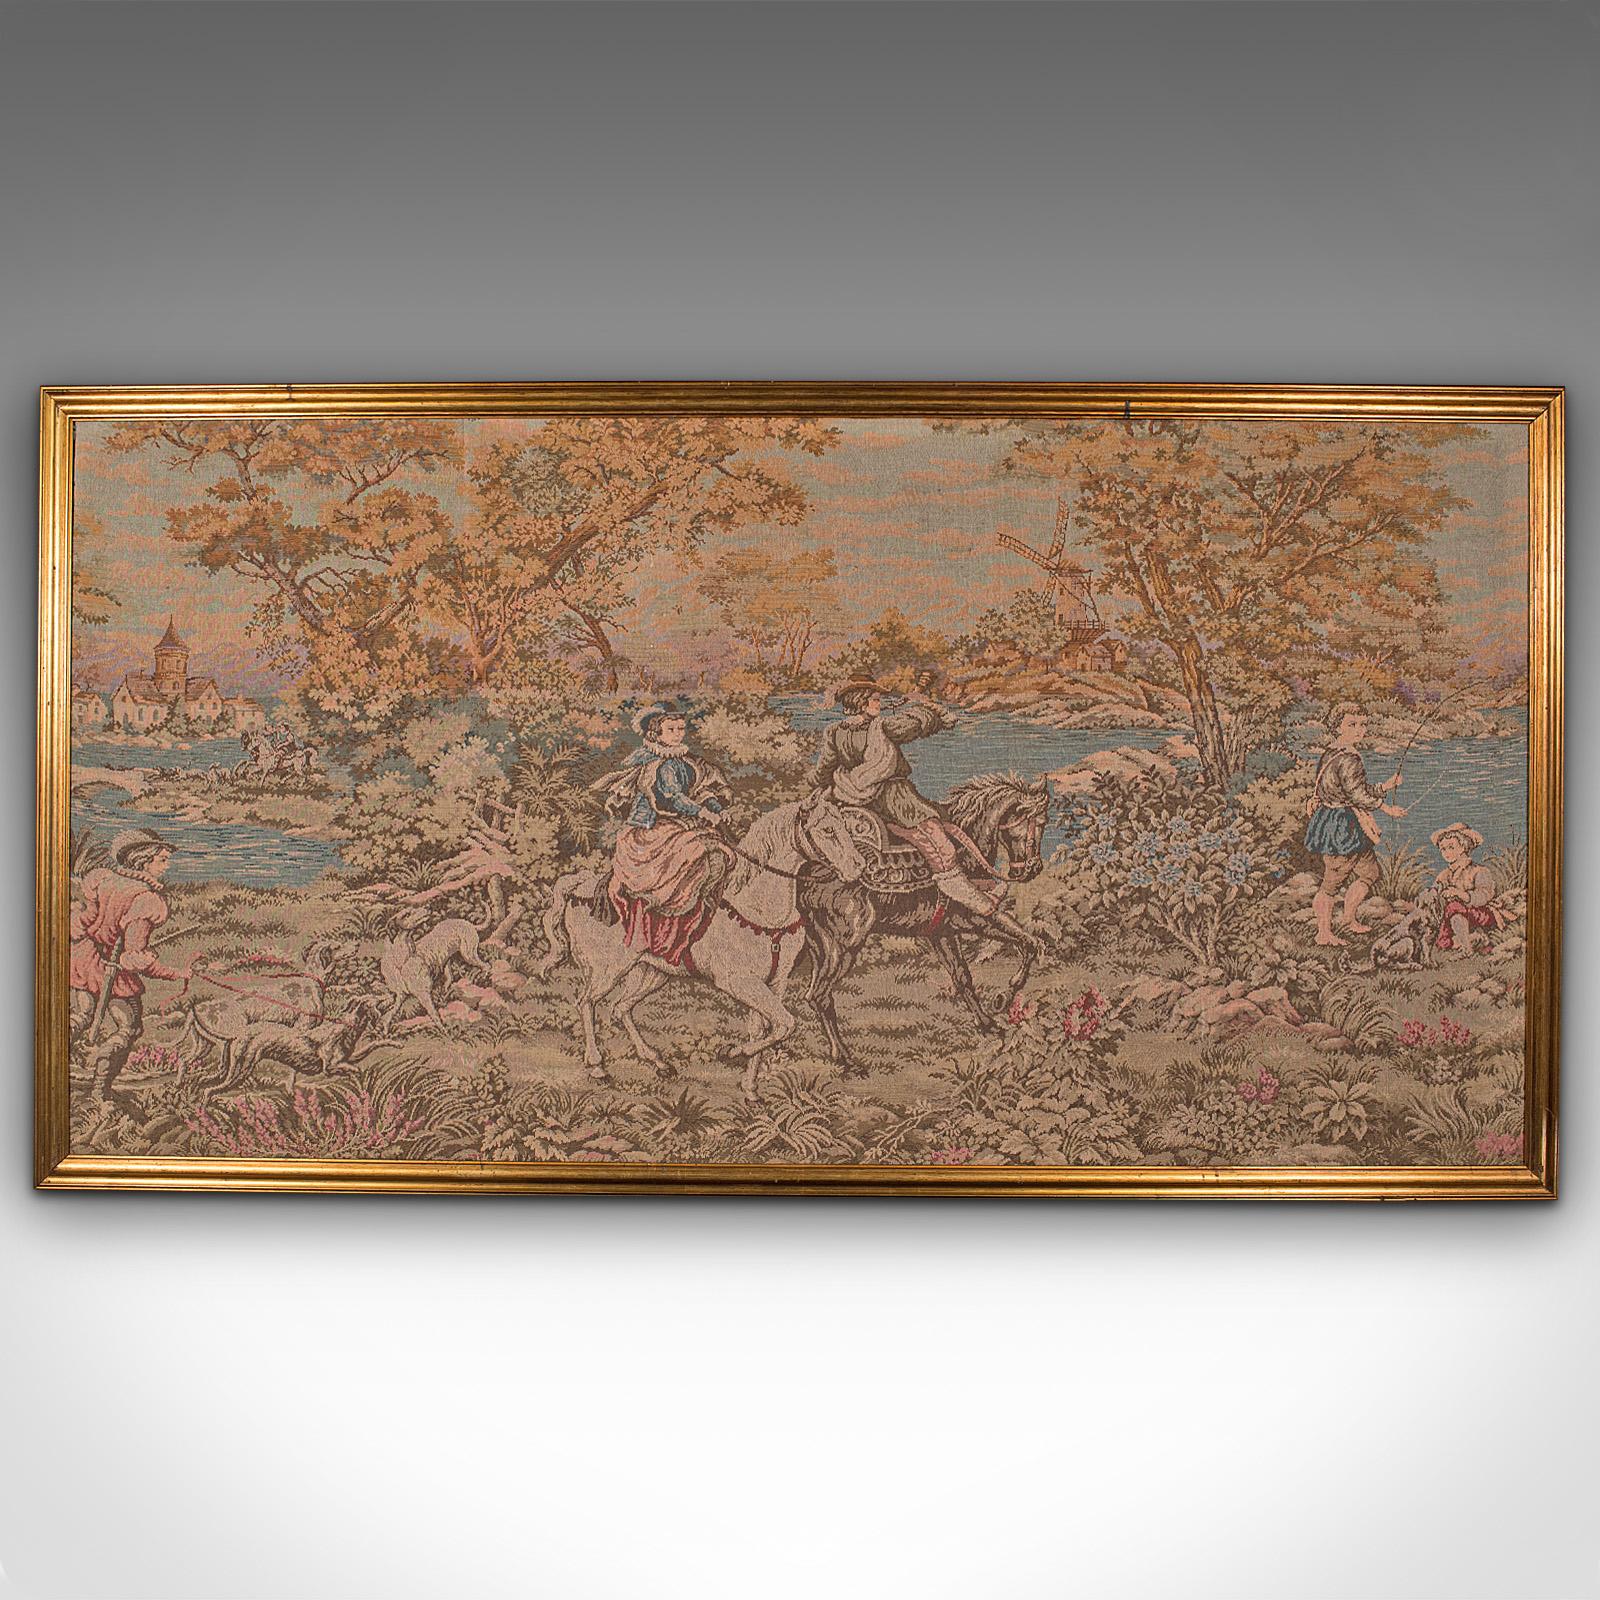 This is a large vintage panoramic tapestry. A Continental, needlepoint decorative panel with gilt frame, dating to the early 20th century, circa 1930.

Of wide proportion with charming scenery and interest
Displays a desirable aged patina